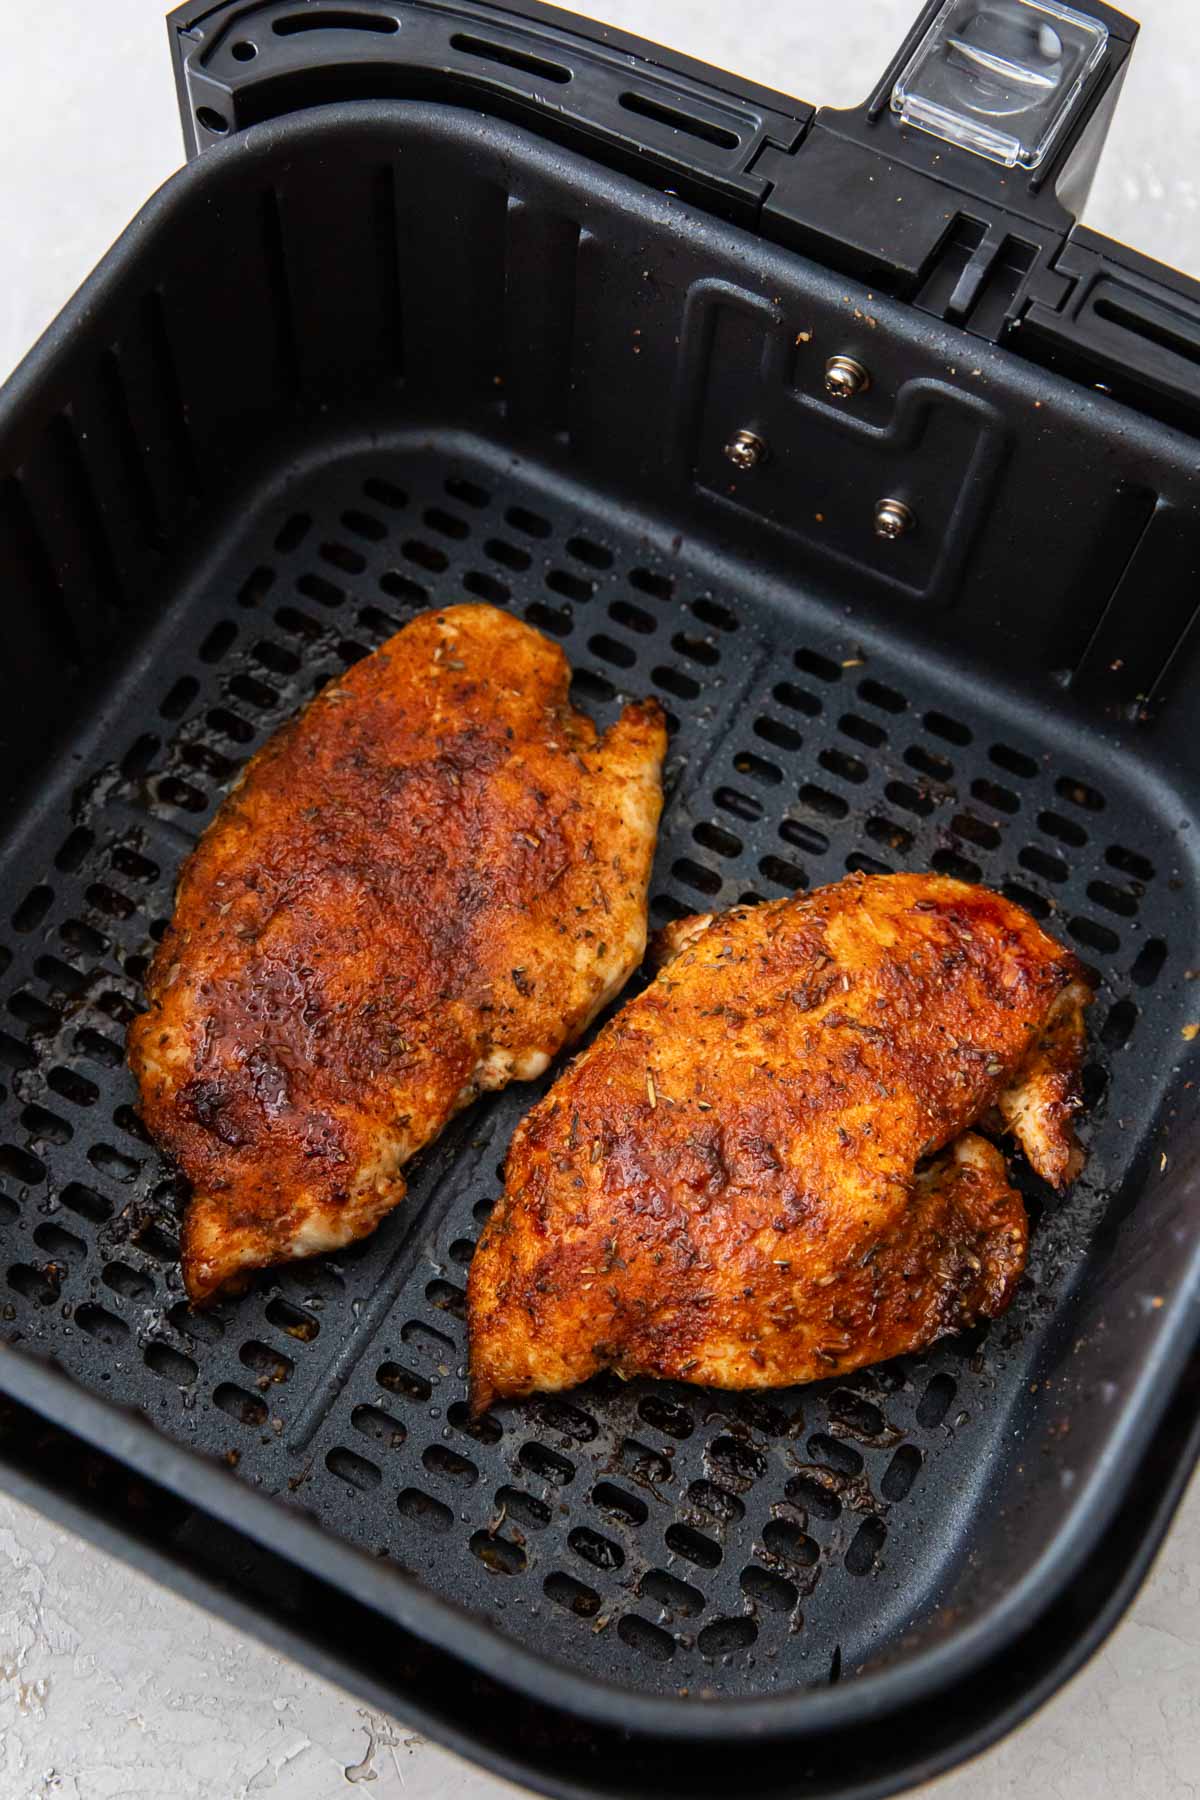 Two cooked chicken breasts in an air fryer.